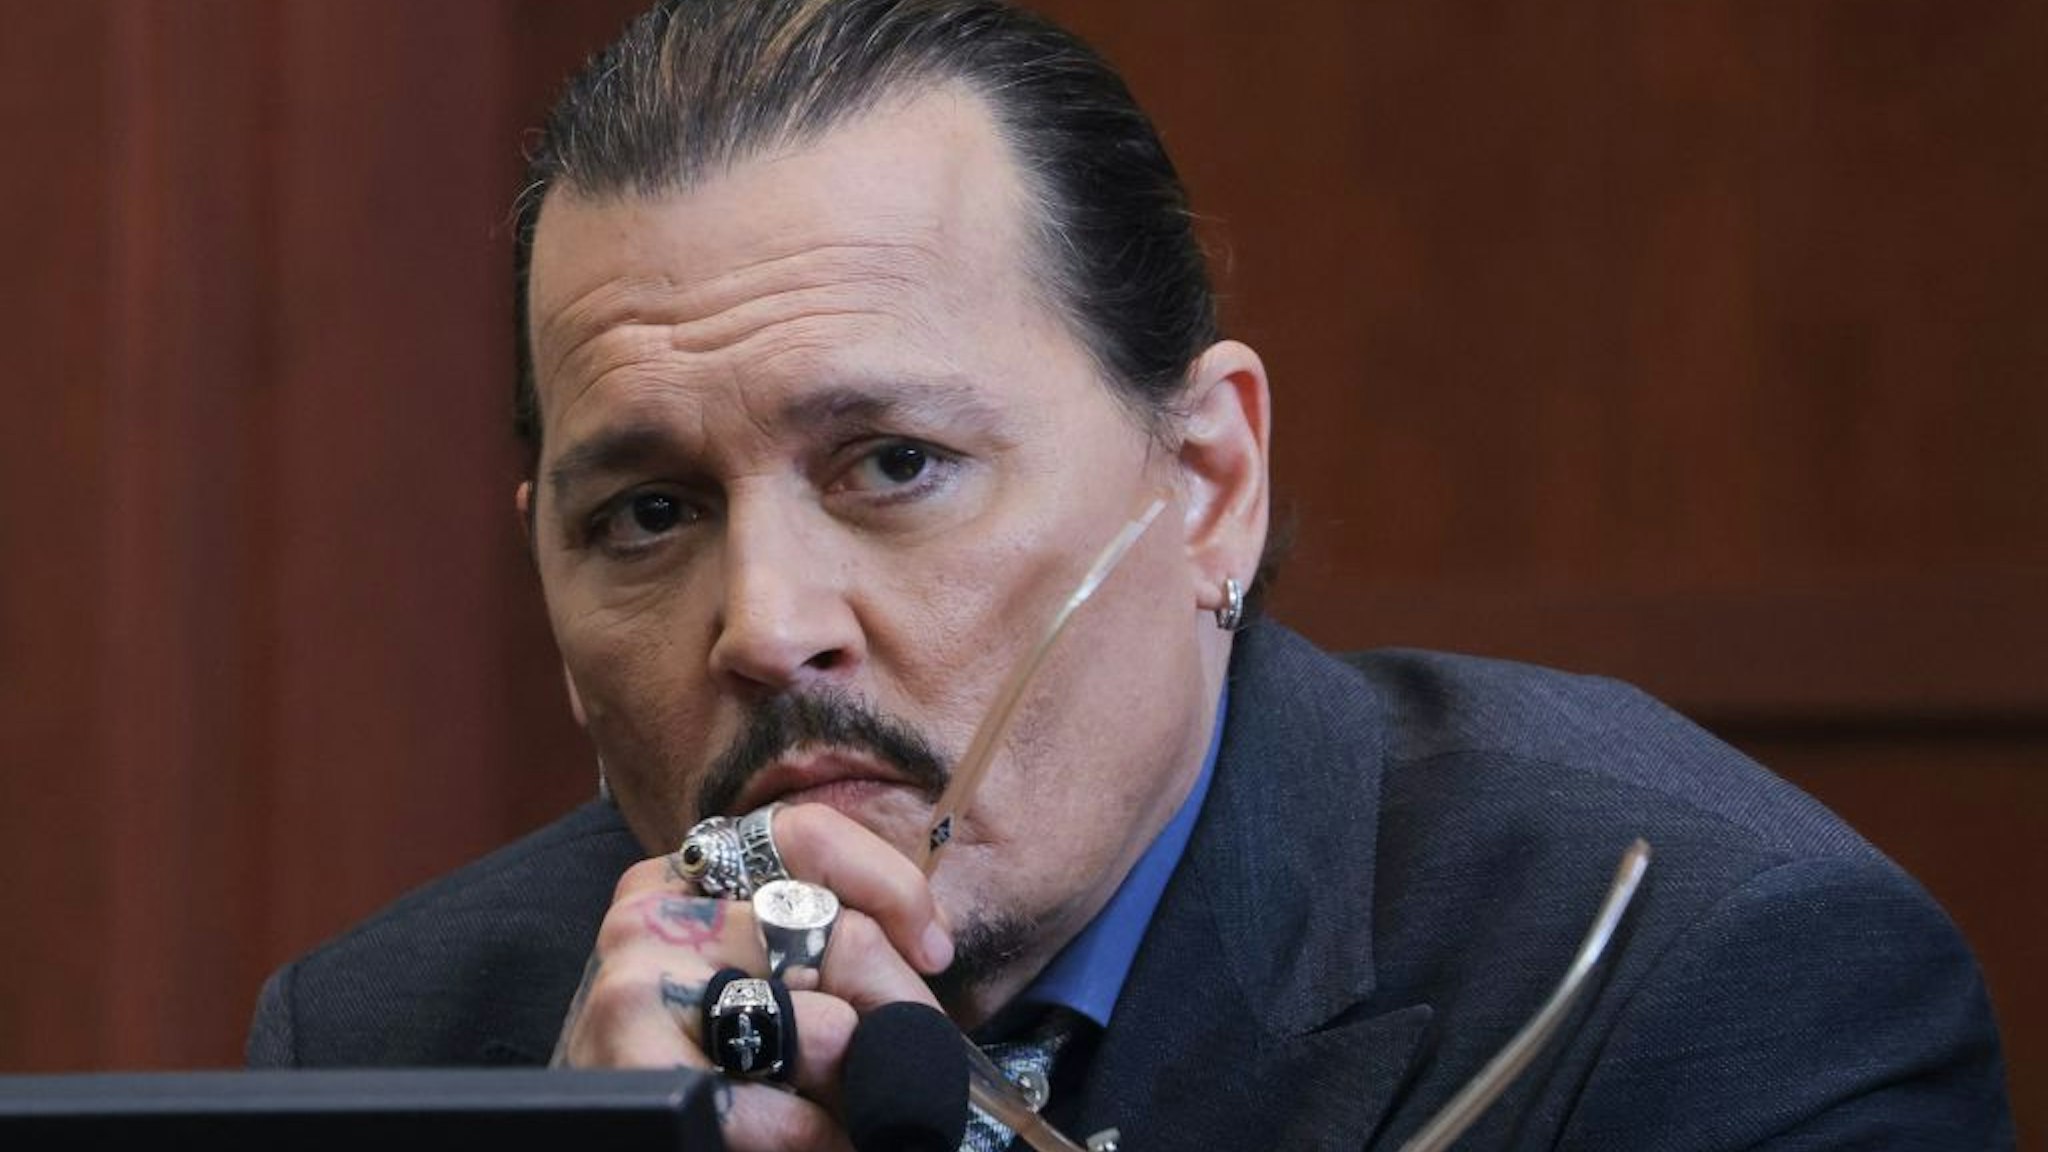 Actor Johnny Depp listens to a question as he testifies in the courtroom during his defamation trial against his ex-wife Amber Heard, at the Fairfax County Circuit Courthouse in Fairfax, Virginia, on May 25, 2022. - Actor Johnny Depp is suing ex-wife Amber Heard for libel after she wrote an op-ed piece in The Washington Post in 2018 referring to herself as a public figure representing domestic abuse. (Photo by EVELYN HOCKSTEIN / POOL / AFP) (Photo by EVELYN HOCKSTEIN/POOL/AFP via Getty Images)